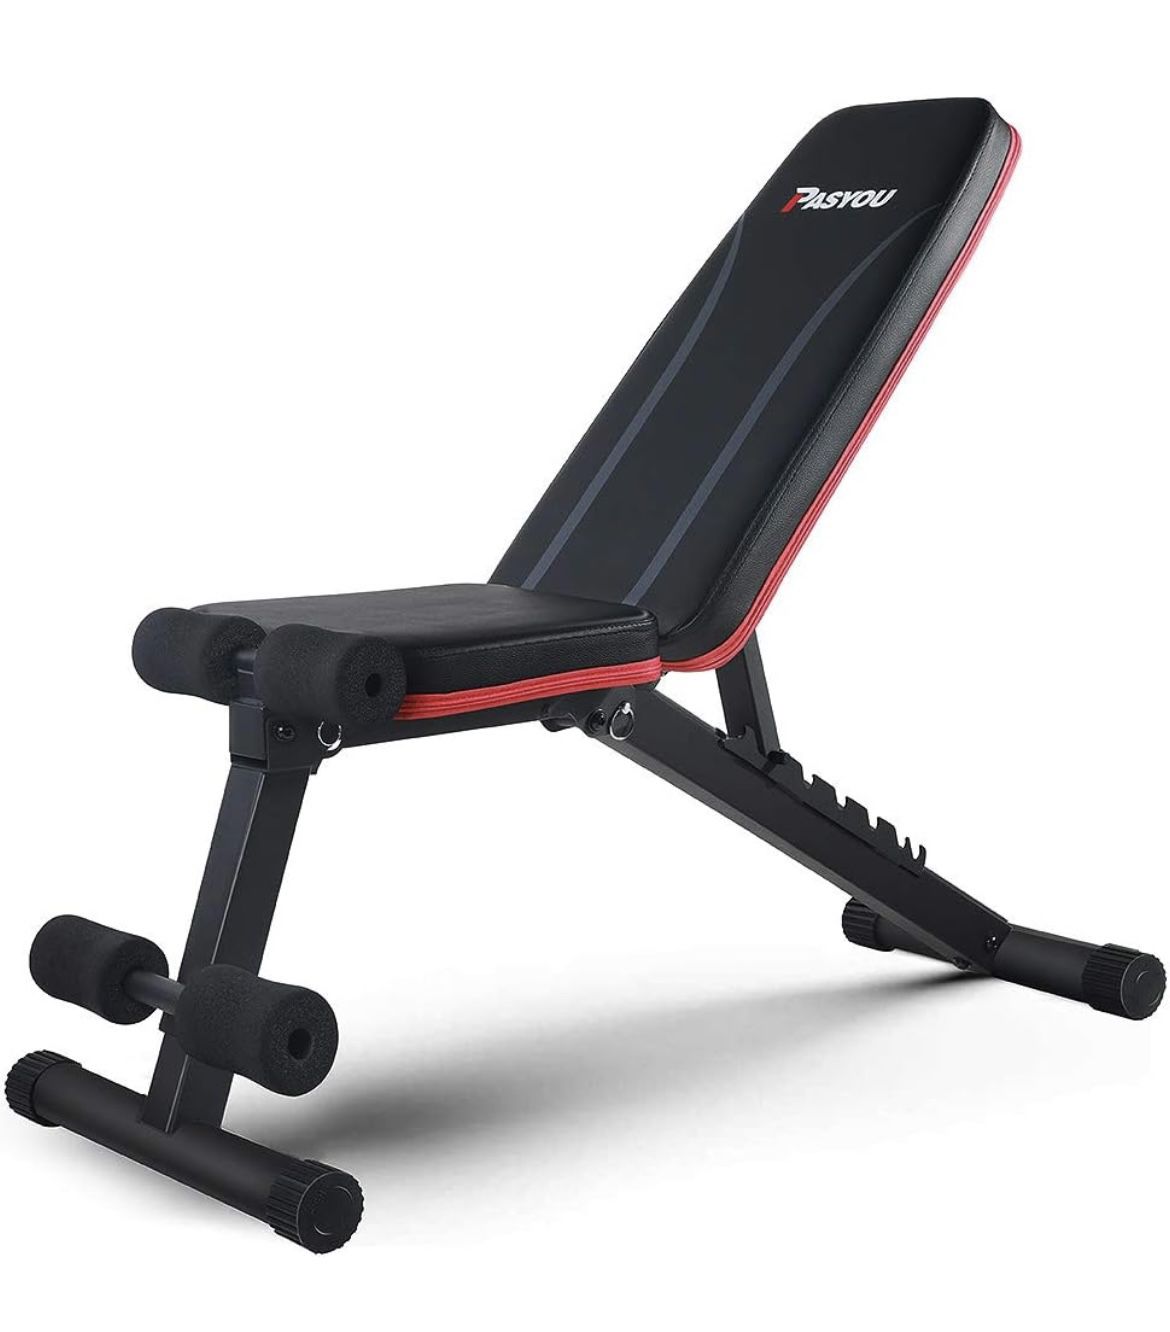 B-127 PASYOU Adjustable Weight Bench Full Body Workout Multi-Purpose Foldable Incline Decline Exercise Workout Bench for Home Gym